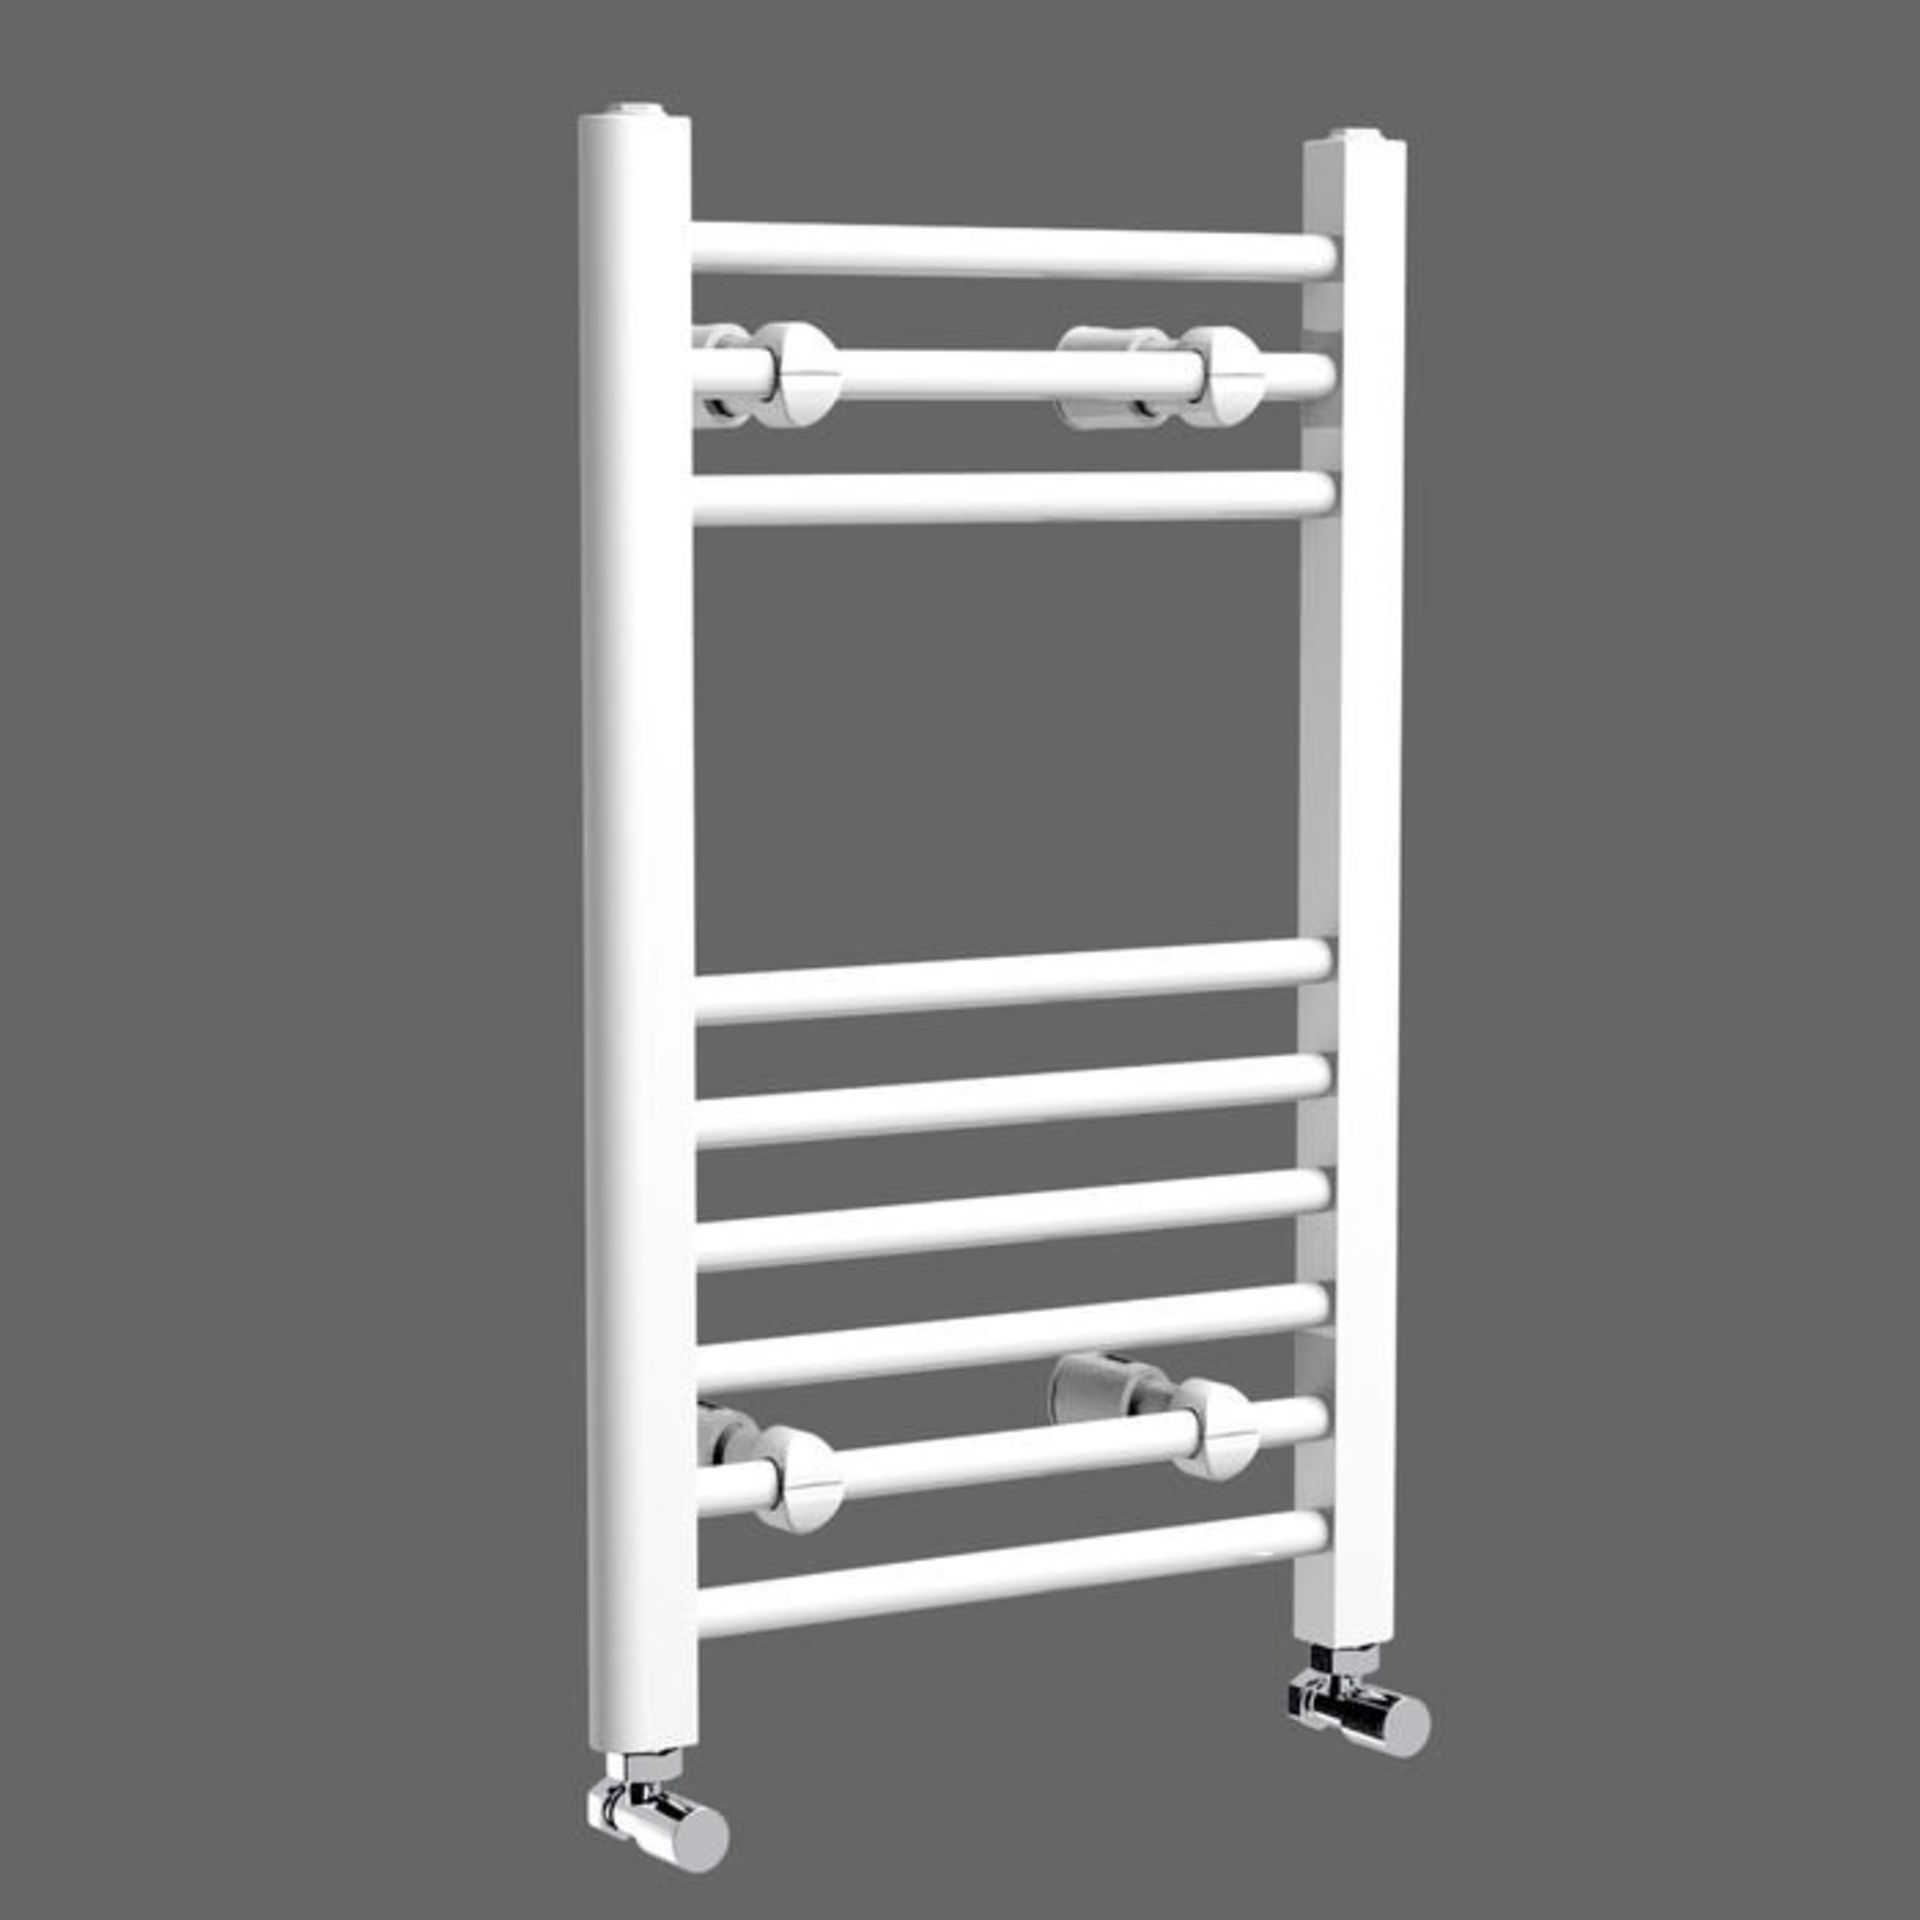 (Z174) 650x400mm White Straight Rail Ladder Towel Radiator. Low carbon steel, high quality white - Image 3 of 4